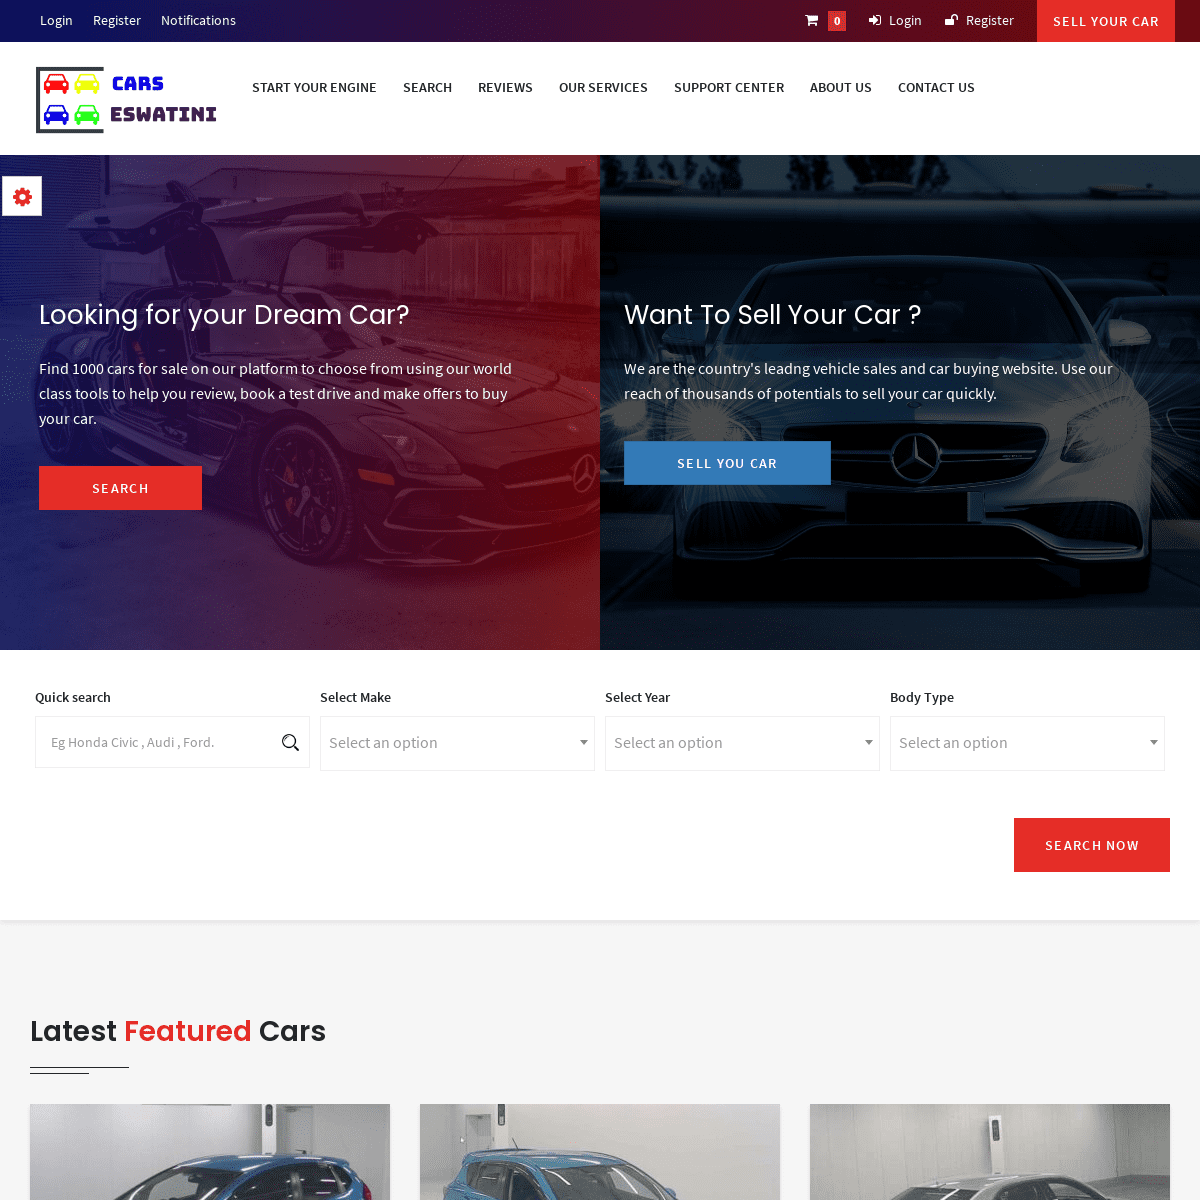 A complete backup of https://carseswatini.com